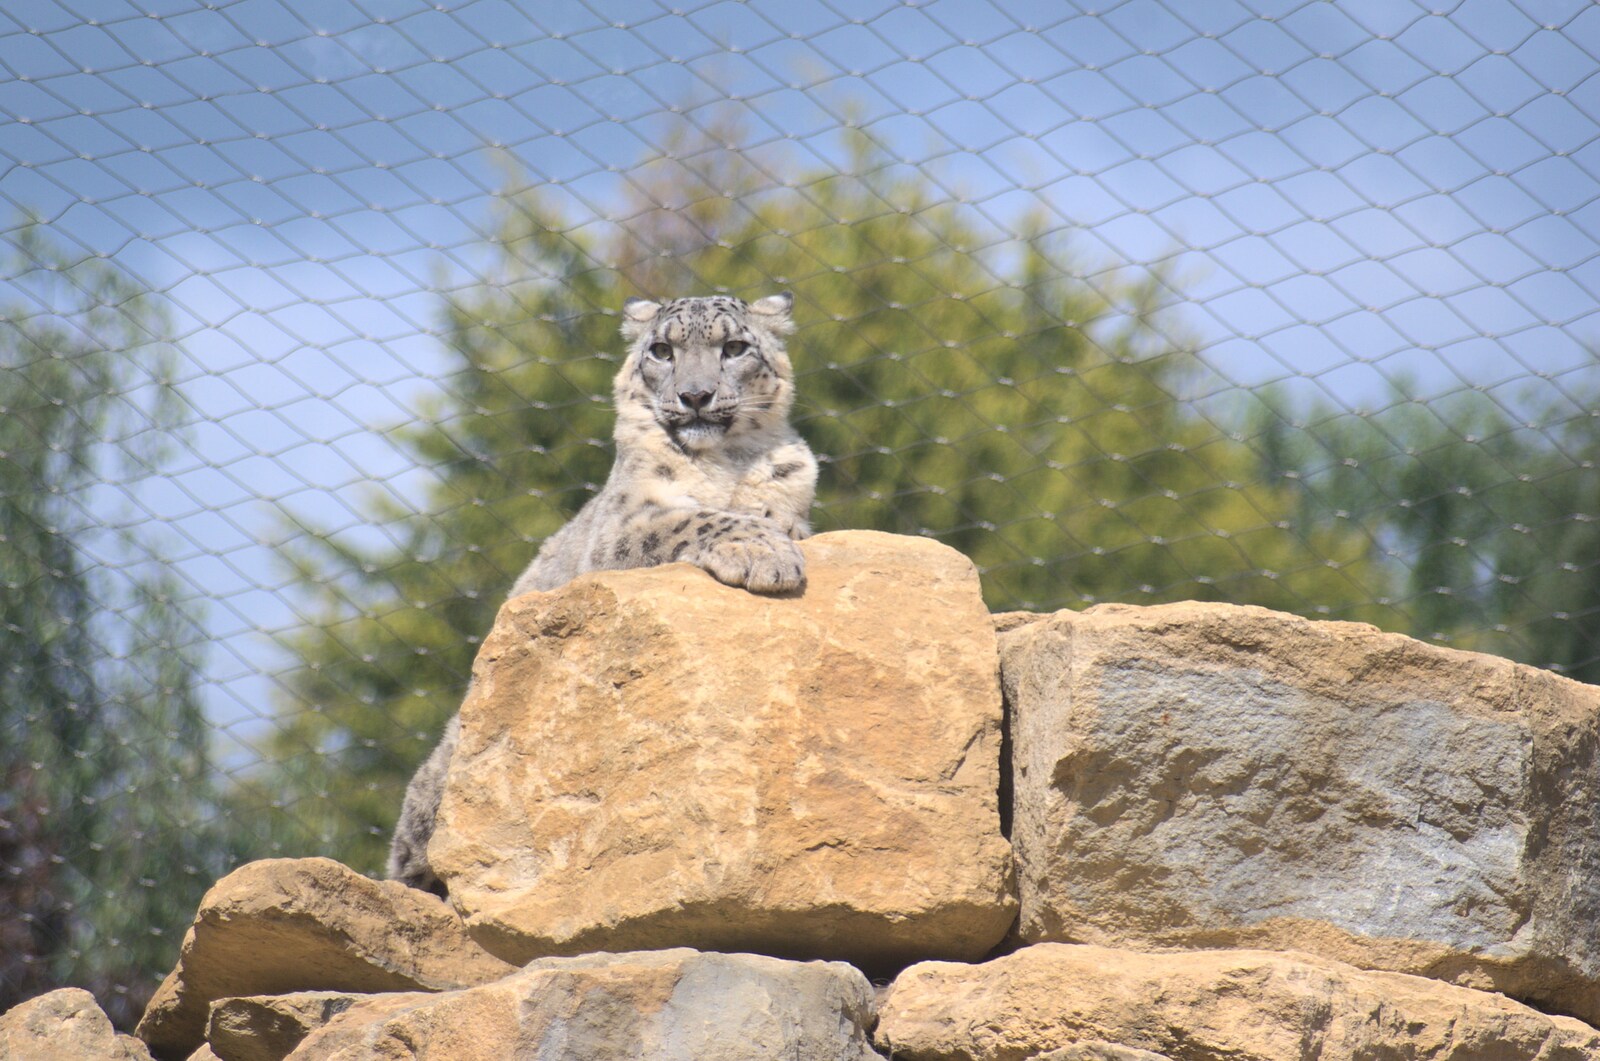 A snow leopard sits on the top of a pile of rocks from Another Day at the Zoo, Banham, Norfolk - 2nd May 2011